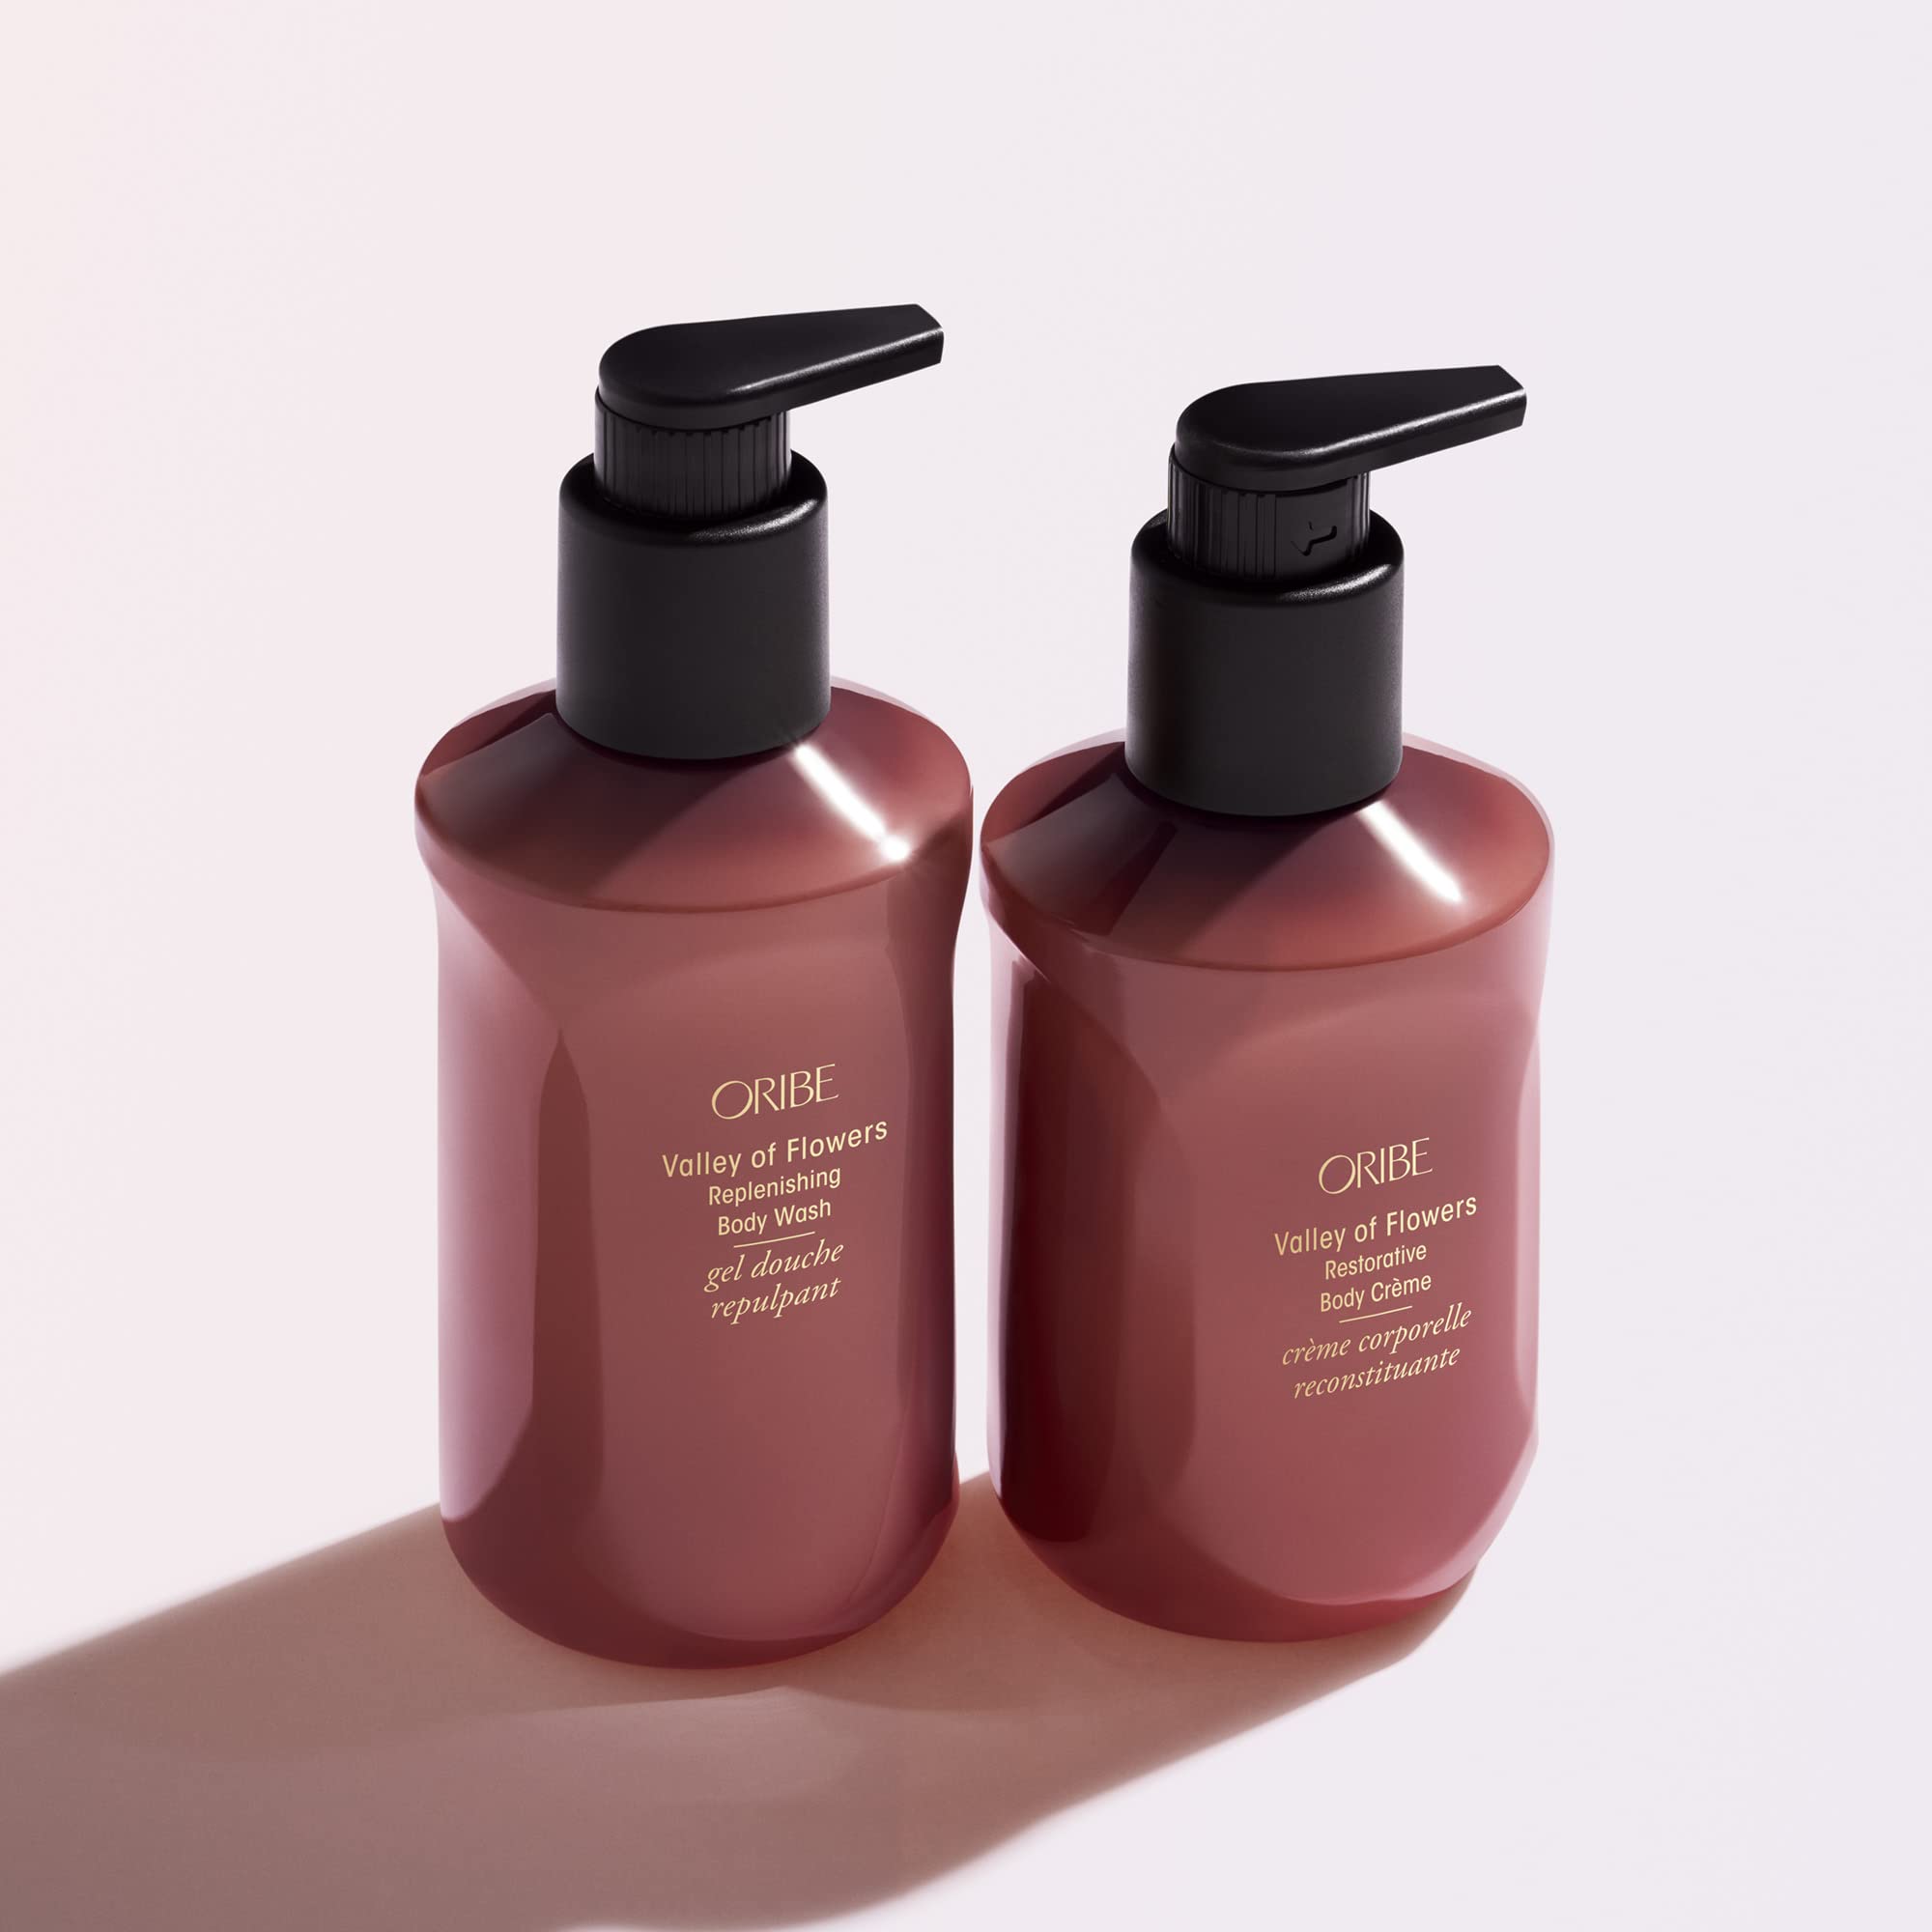 ORIBE Valley of Flowers Body Wash & Crème Duo